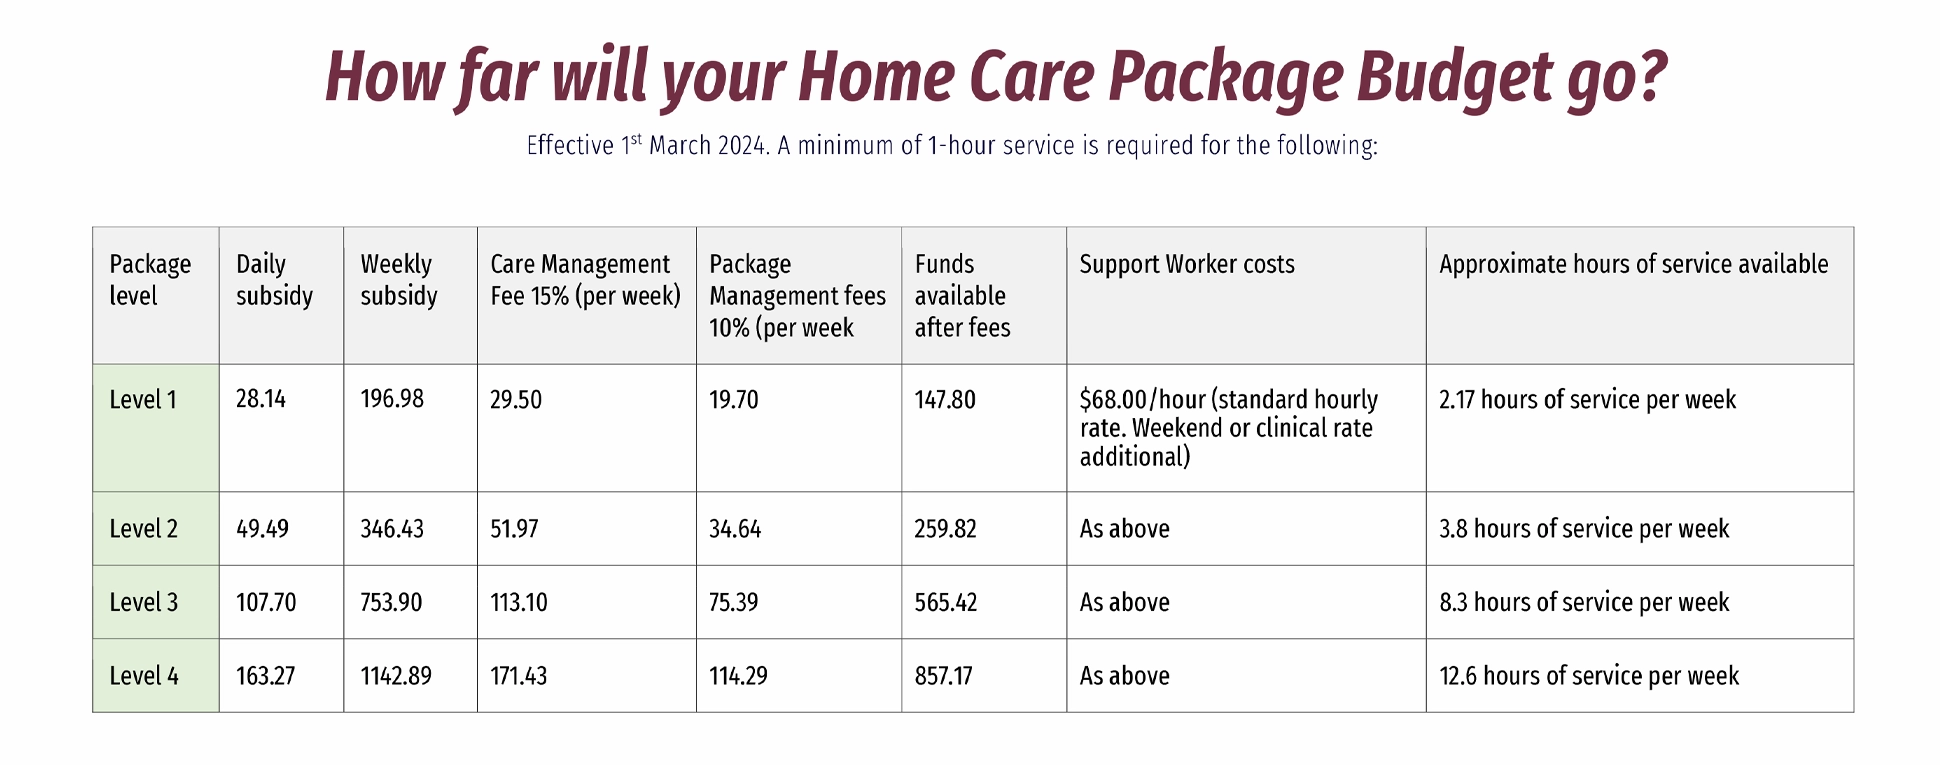 Our Home Care Package Provider fees your aged care budget